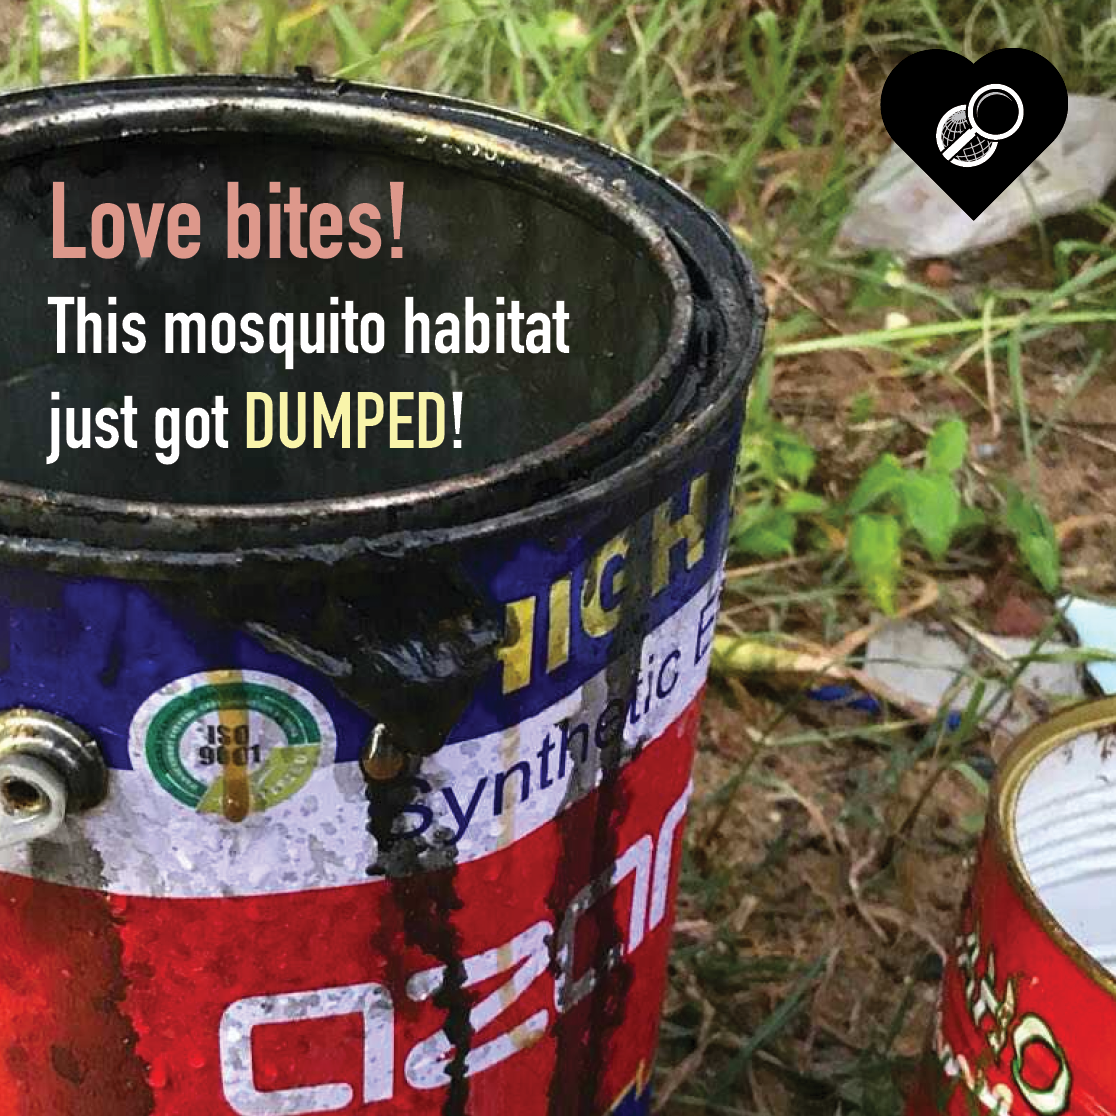 "Love bites! This mosquito habitat just got dumped!" with an image of a can as a potential mosquito habitat.